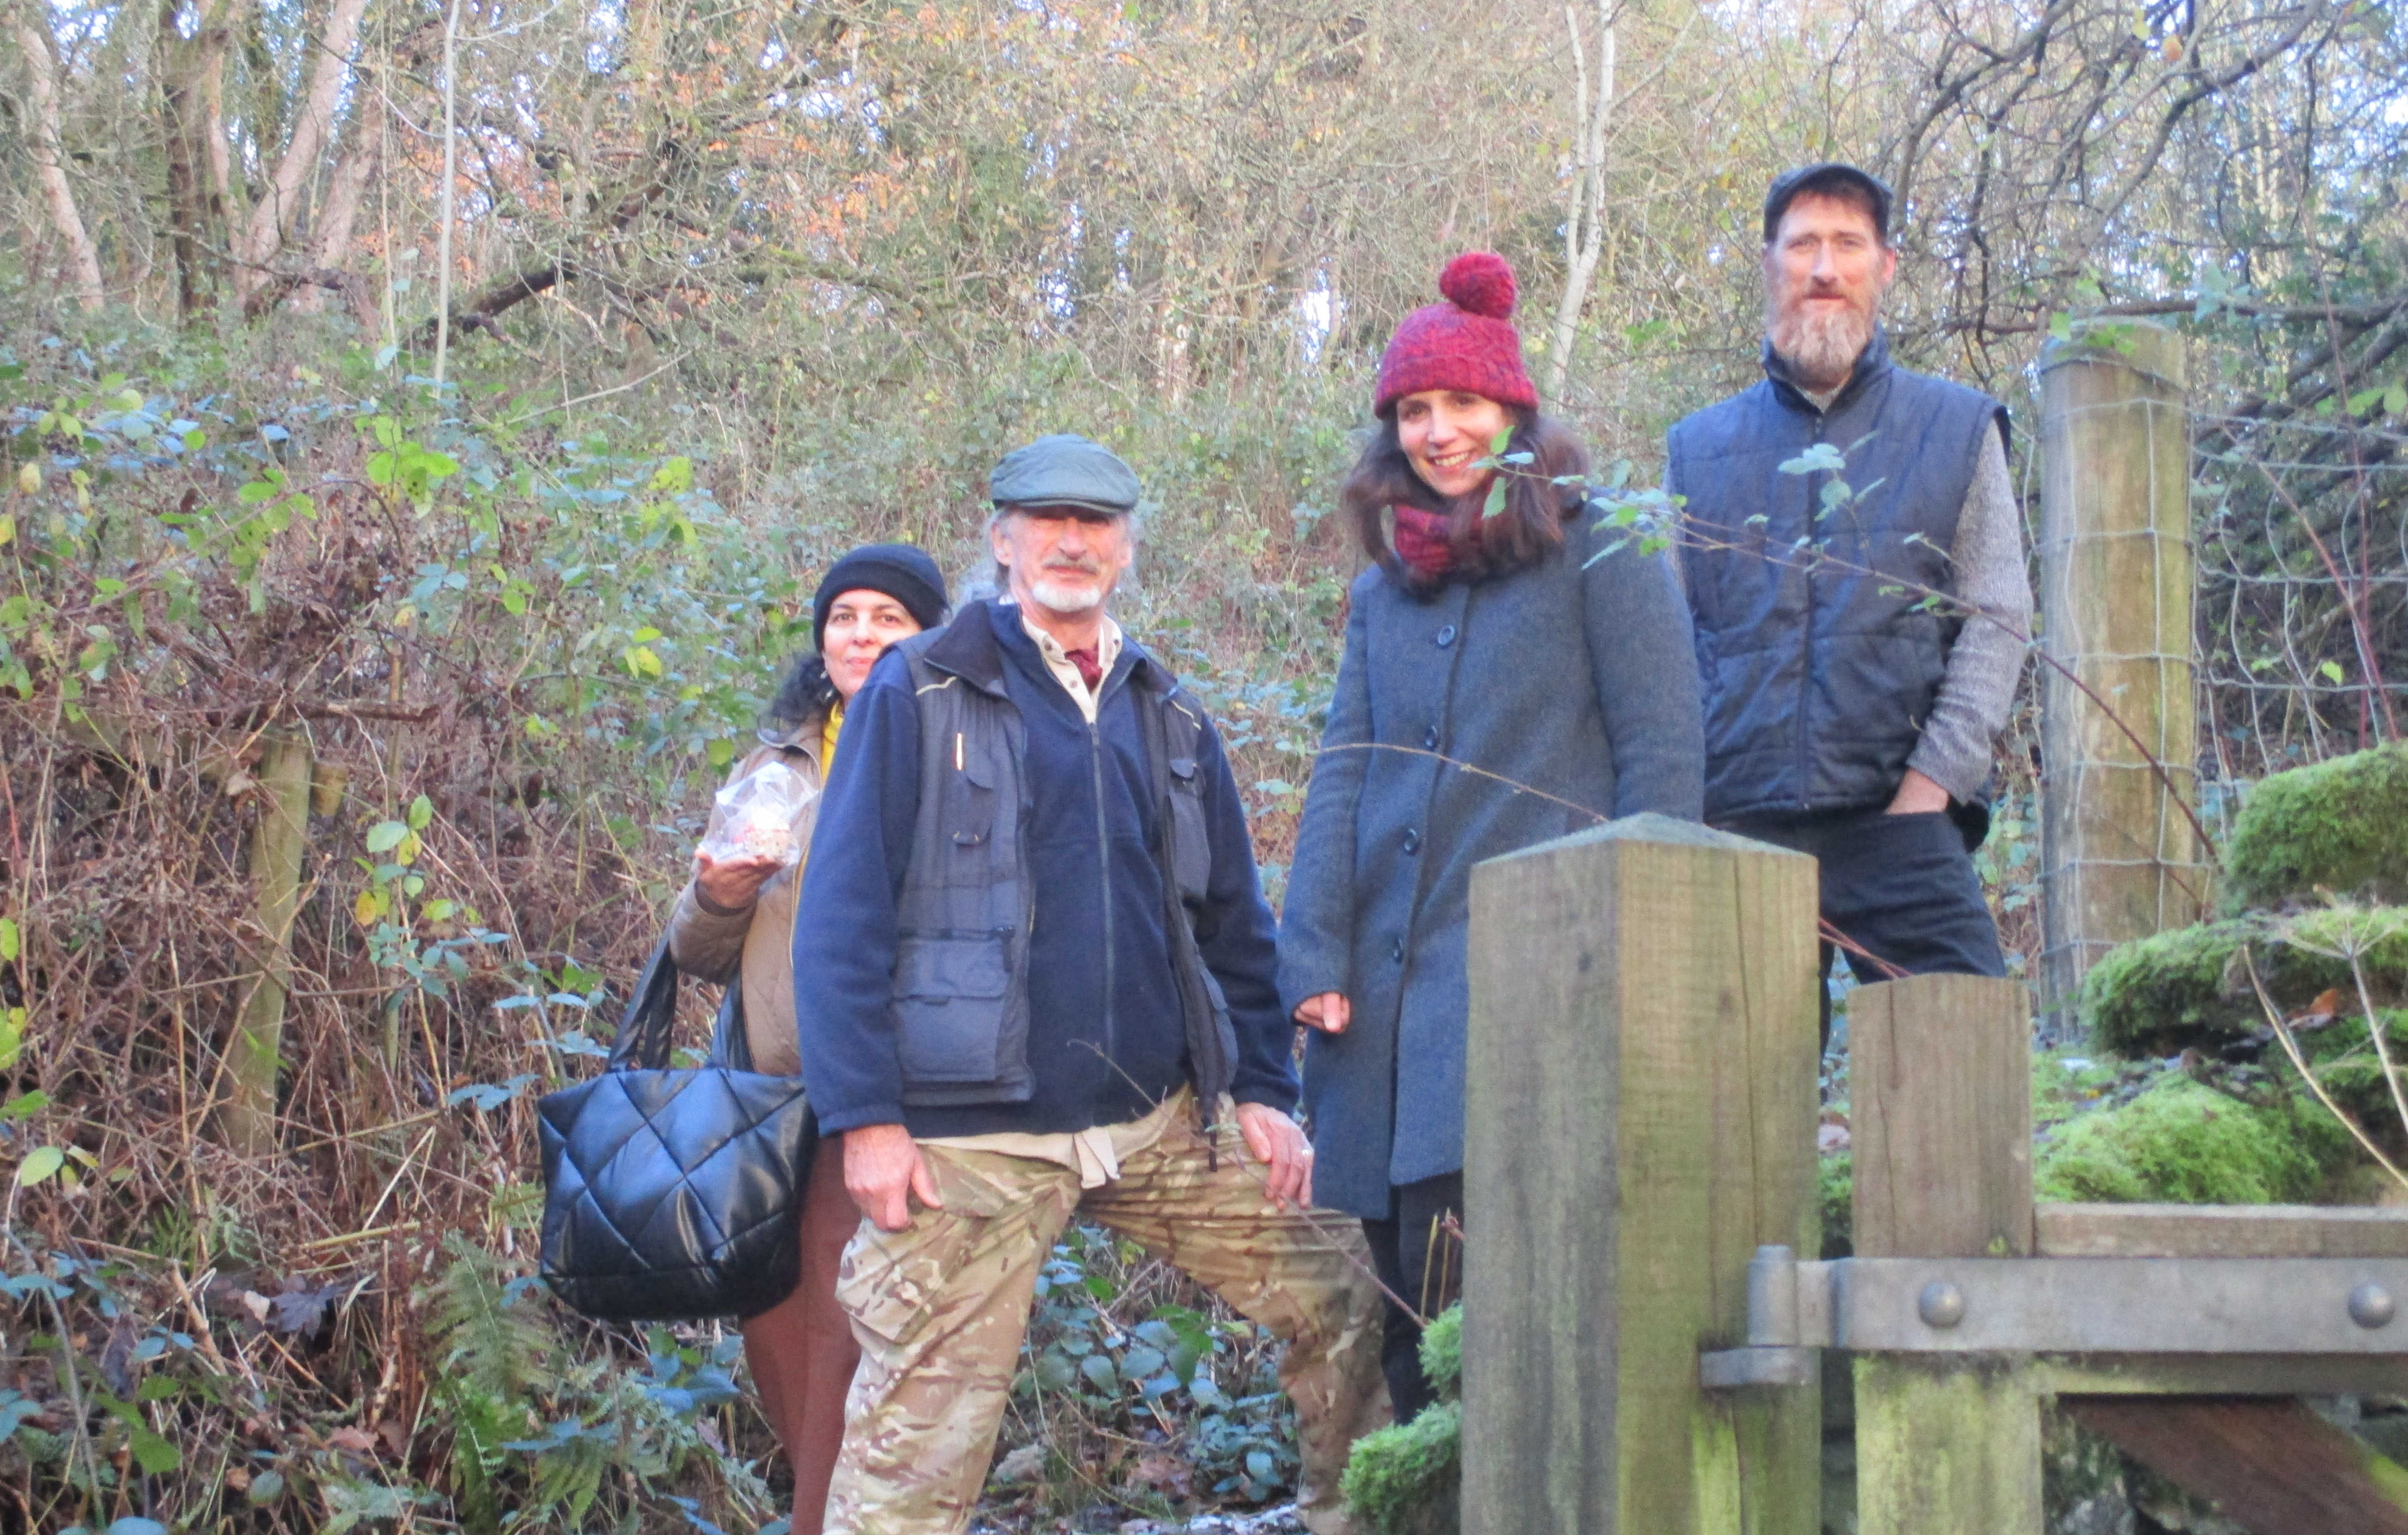 Amgus Soutar and colleagues at The Northern School of Permaculture